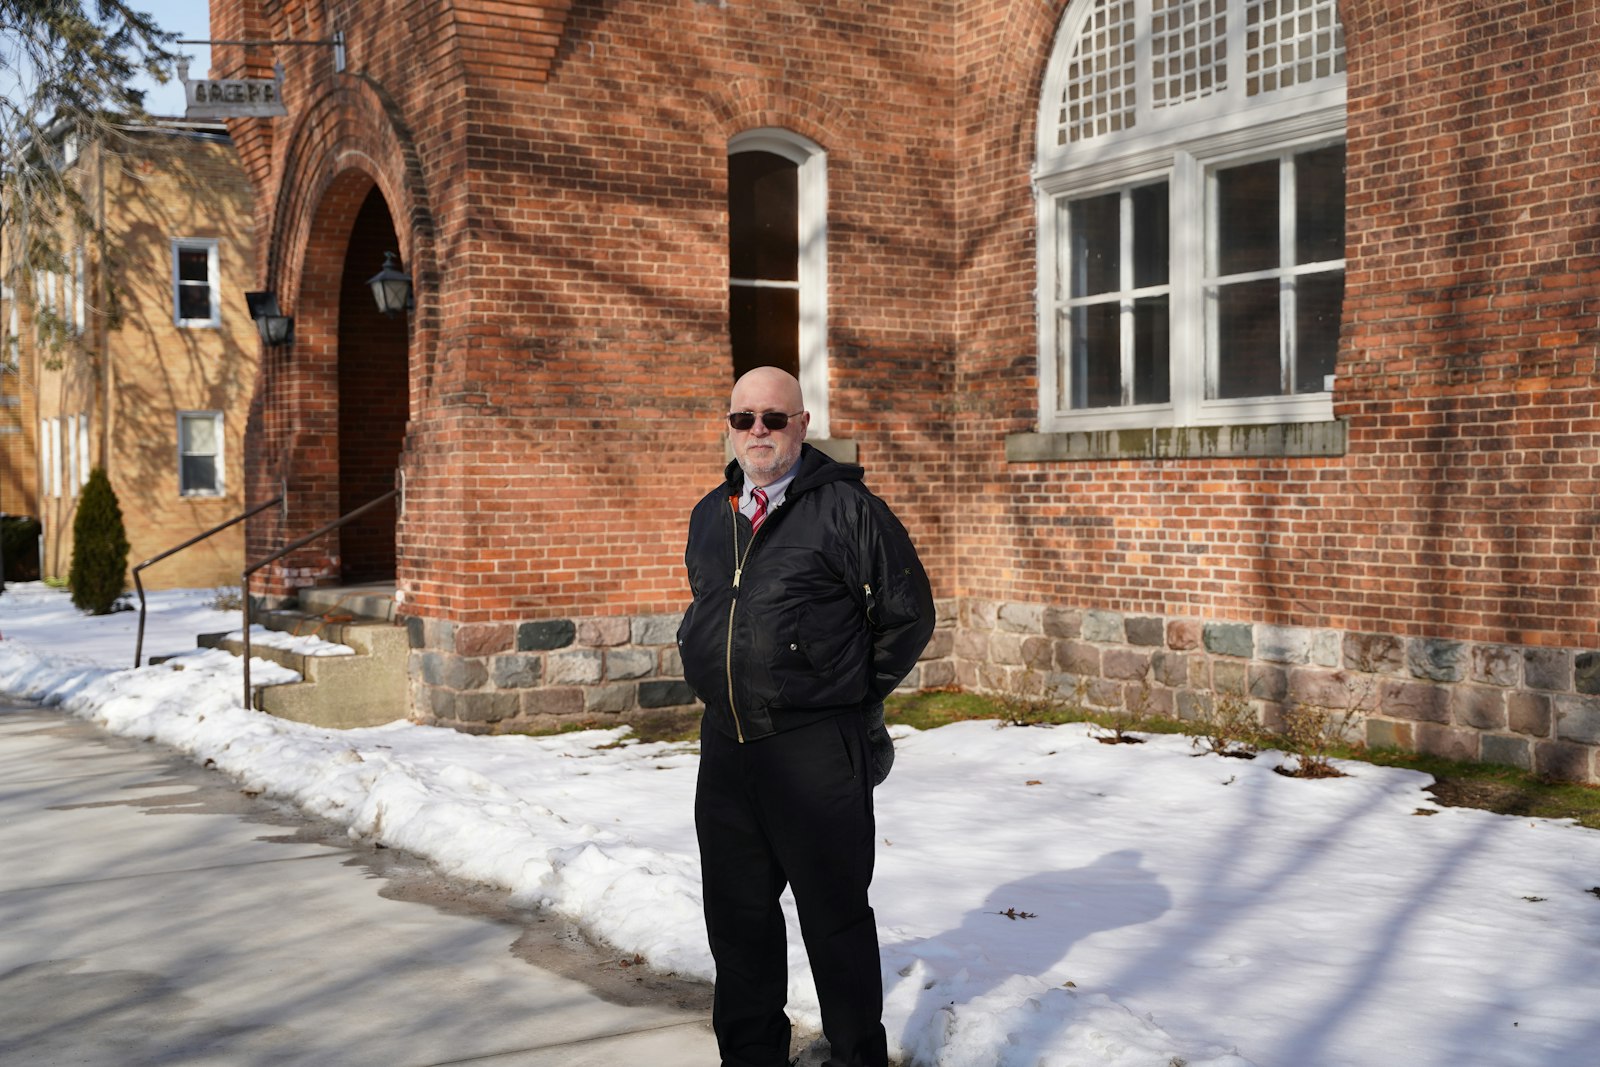 John Radzilowski, Ph.D., director of the Polish Institute for Culture and Research at the Orchard Lake Schools, stands outside the campus' Ark Building, which houses many cultural artifacts and records. Radzilowski wants to better employ the school's artifacts and records by making them more accessible to the public.